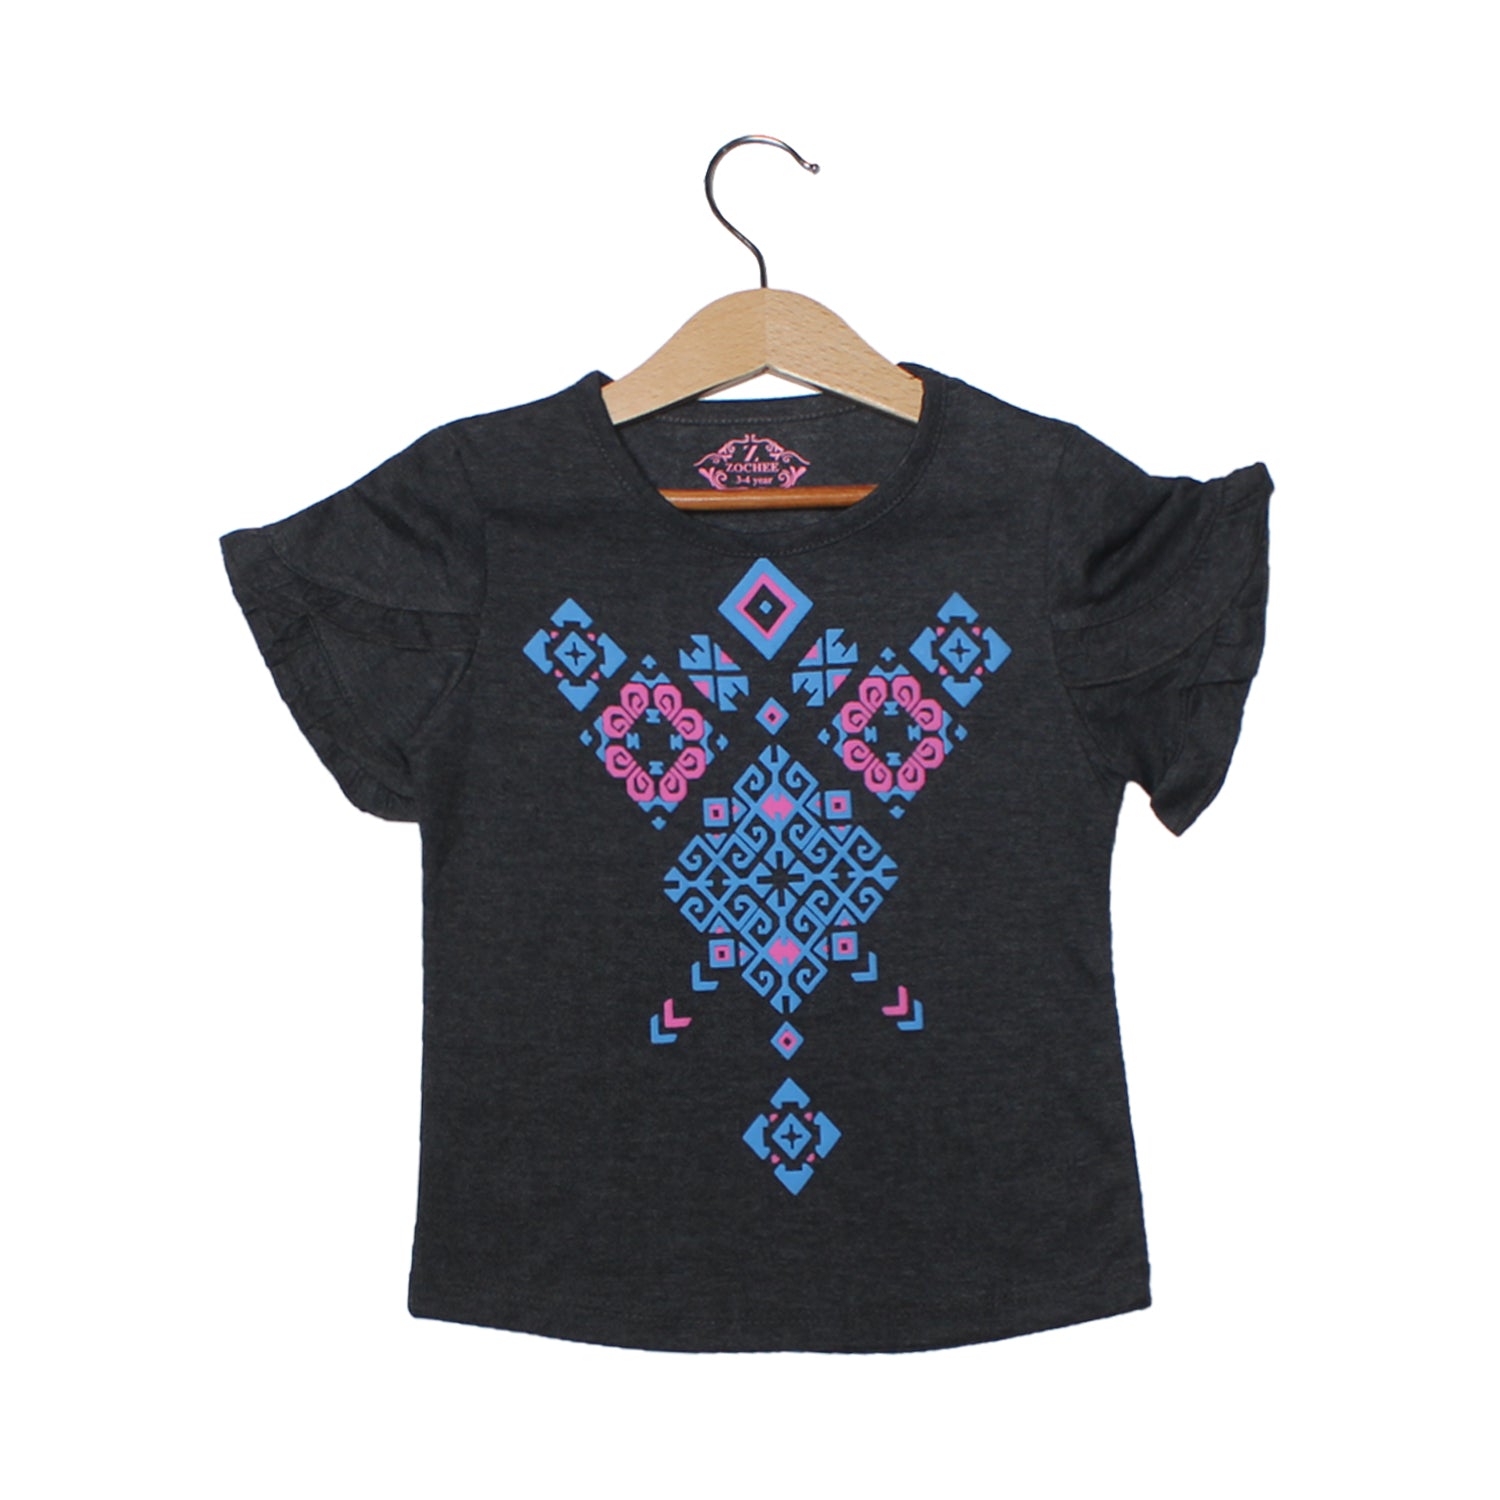 NEW CHARCOAL GREY BLUE DESIGN PRINTED T-SHIRT TOP FOR GIRLS